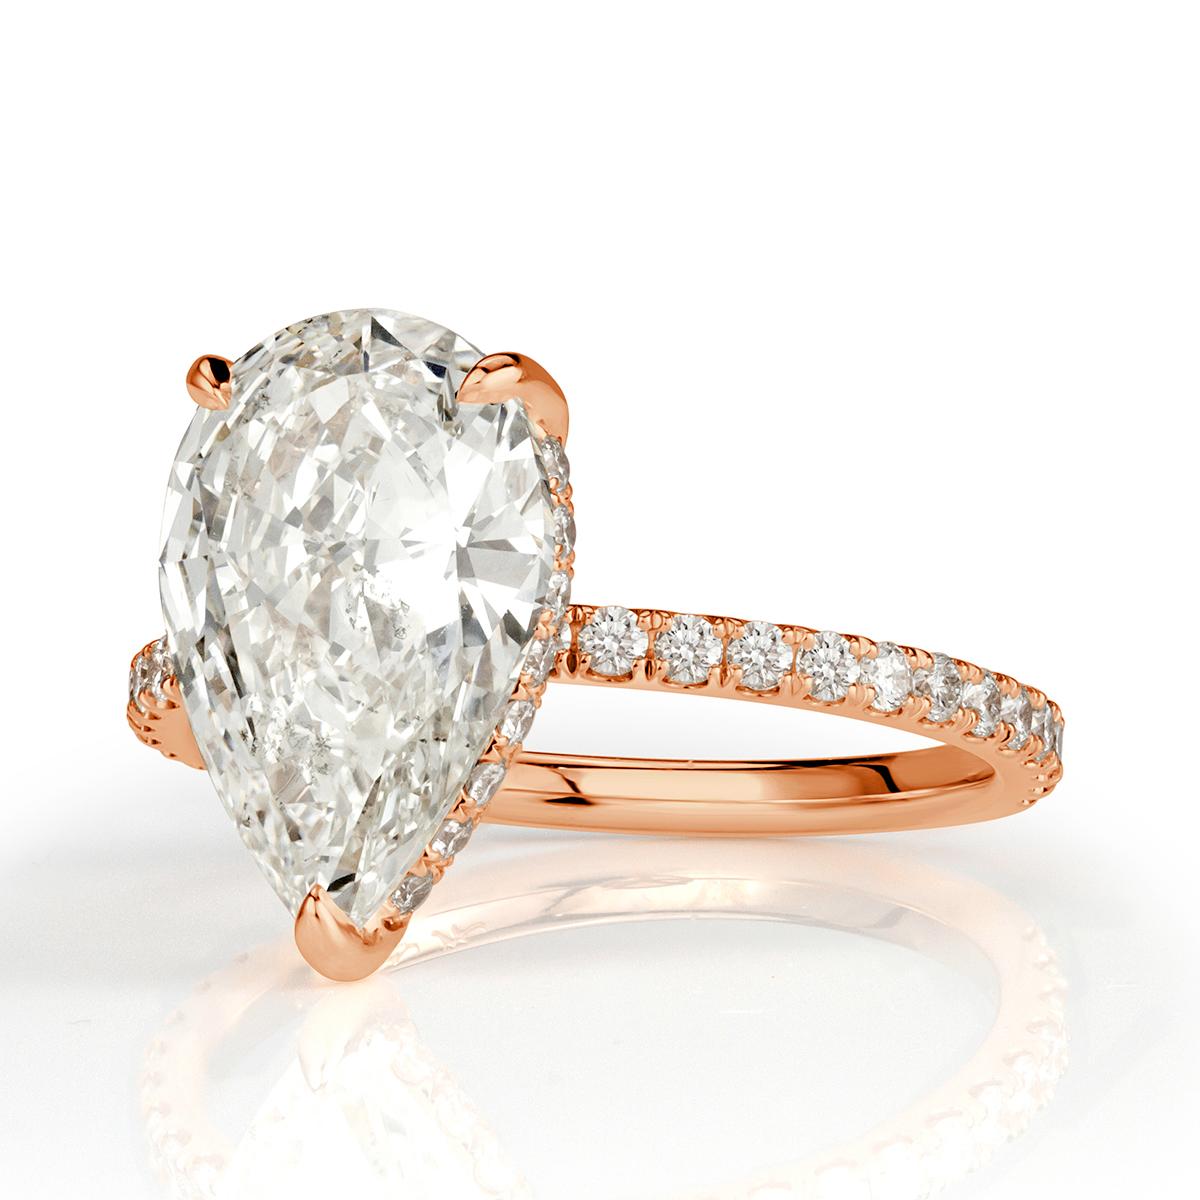 Custom created in 18k rose gold, this gorgeous diamond engagement ring features a stunning 3.01ct pear shaped center diamond, GIA certified at J in color, VS2 in clarity. It faces up white and is immensely brilliant in addition of having exceptional